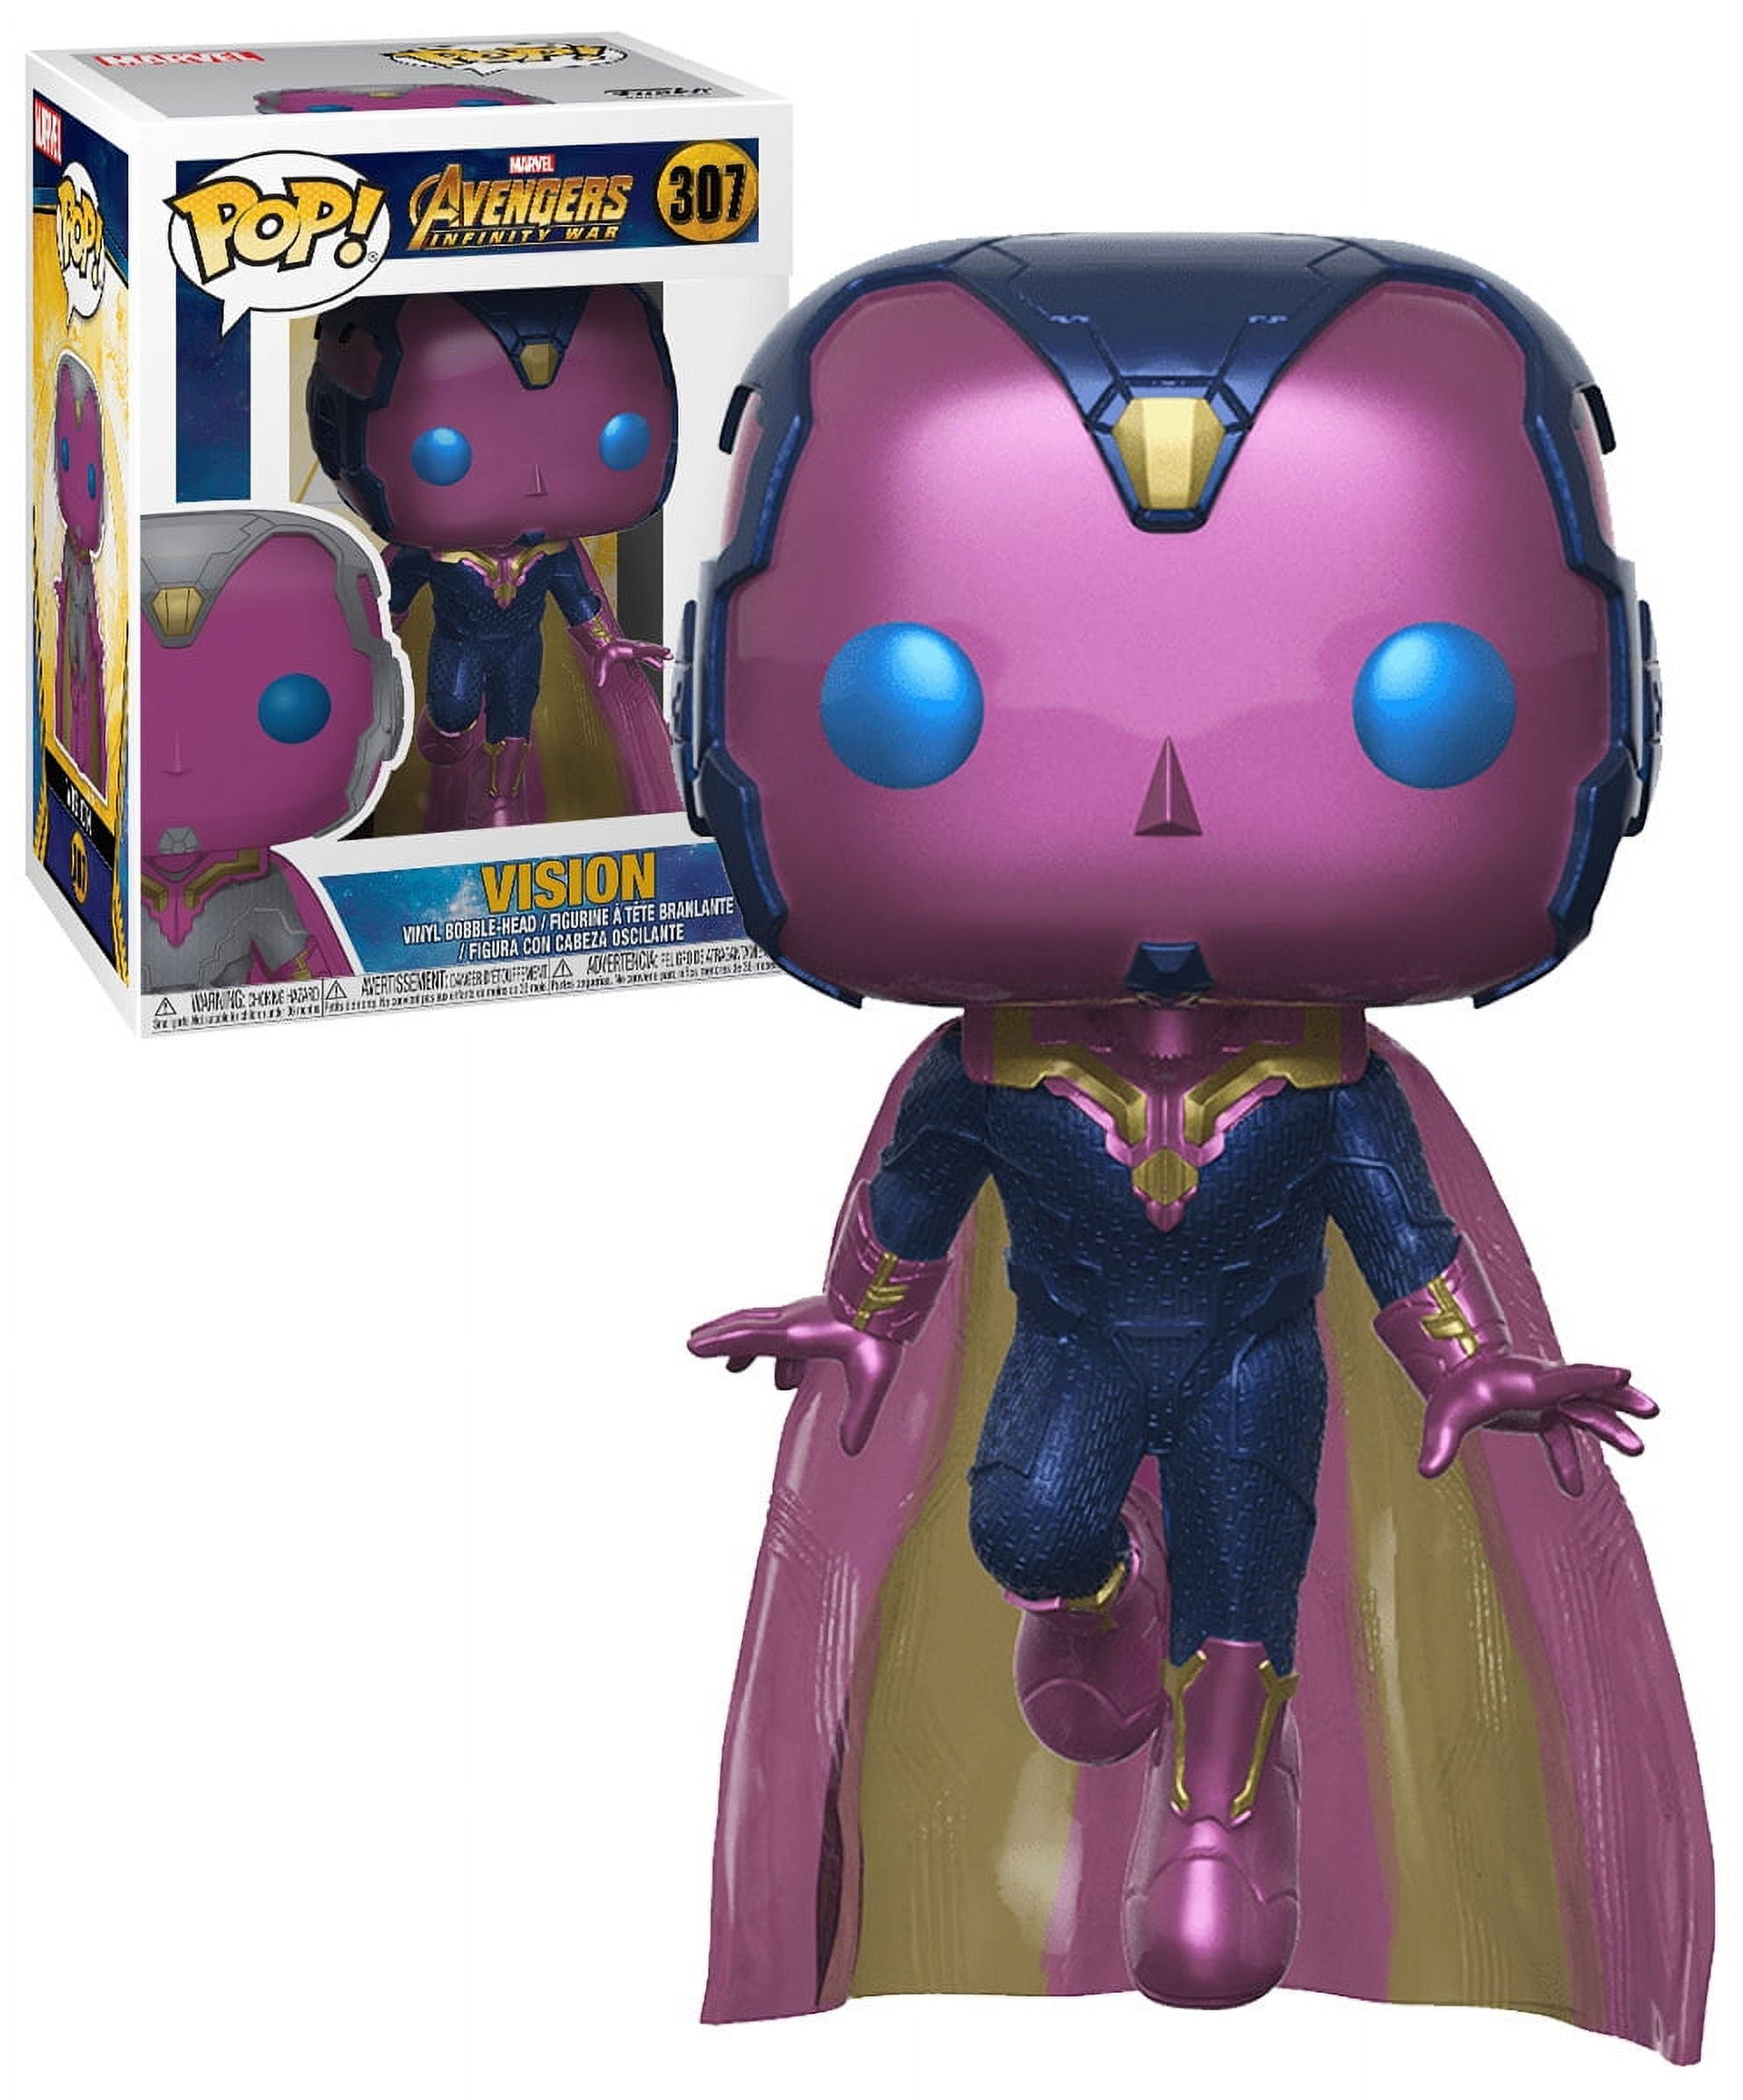 Funko Pop! Marvel #307 Avengers Infinity War Vision (Hot Topic Exclusive)